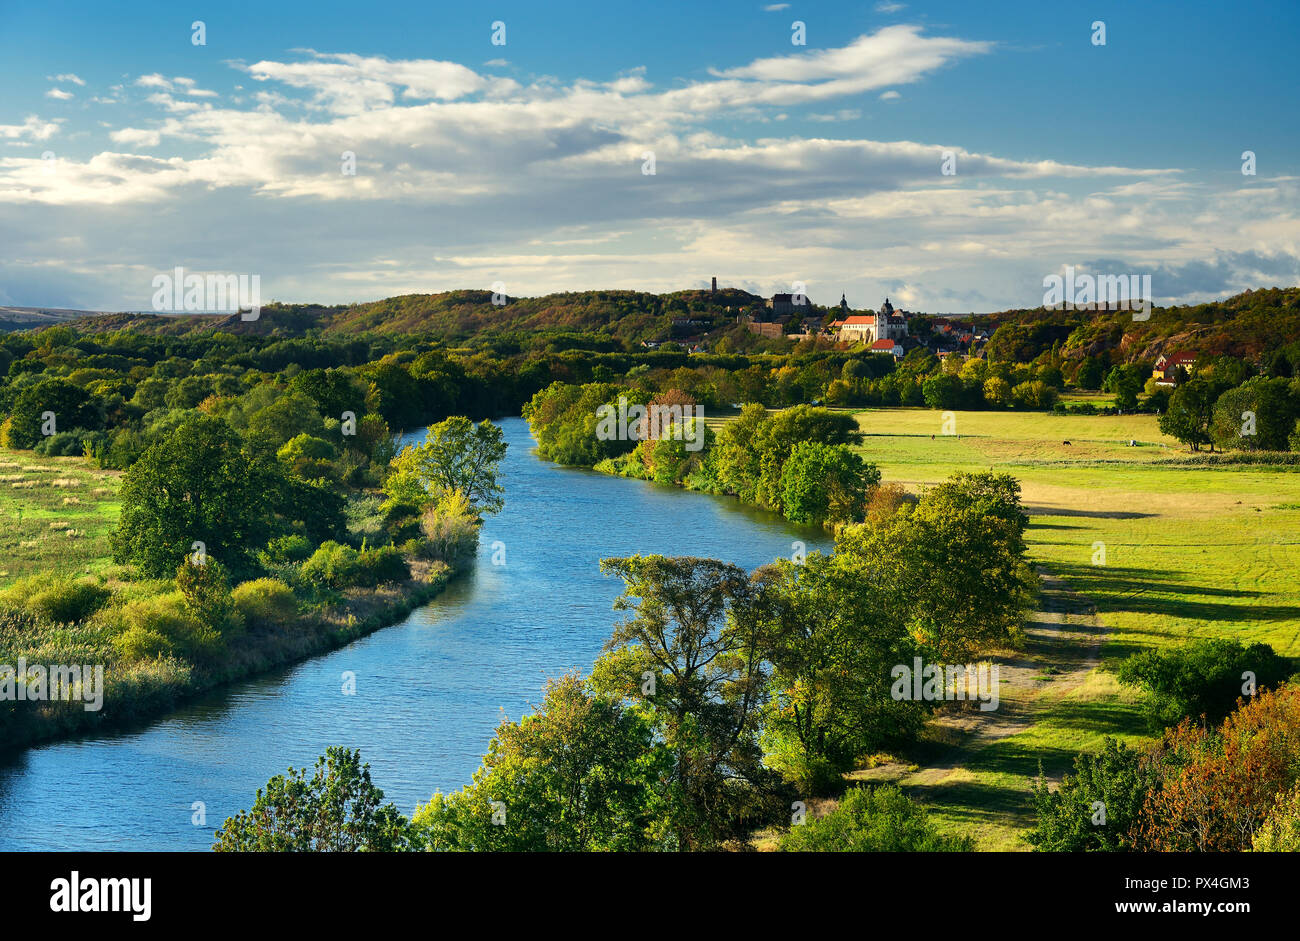 River Saale with Wettin Castle, Wettin, Lower Saale Valley nature park Park, Saxony-Anhalt, Germany Stock Photo